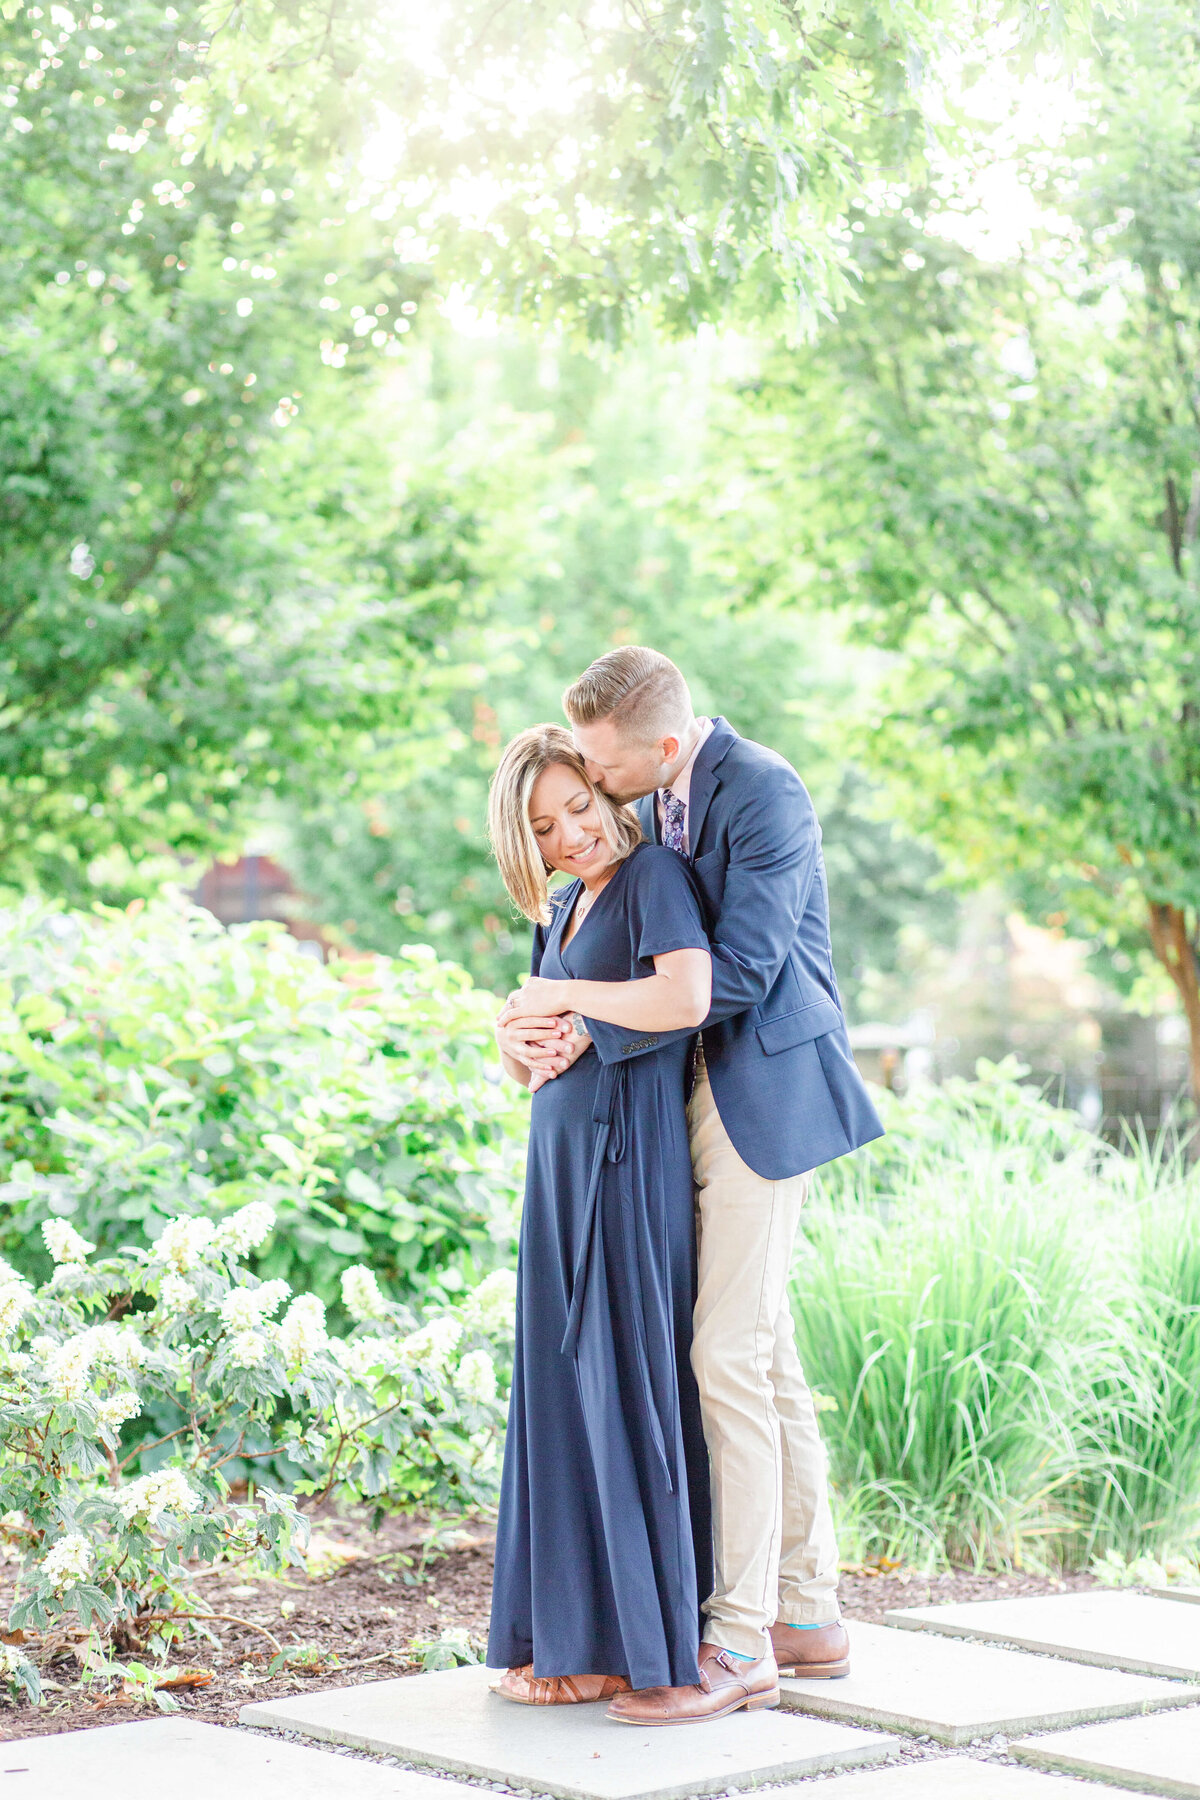 Engagement-photos-in-Kentucky-Bethany-Lane-Photography-1